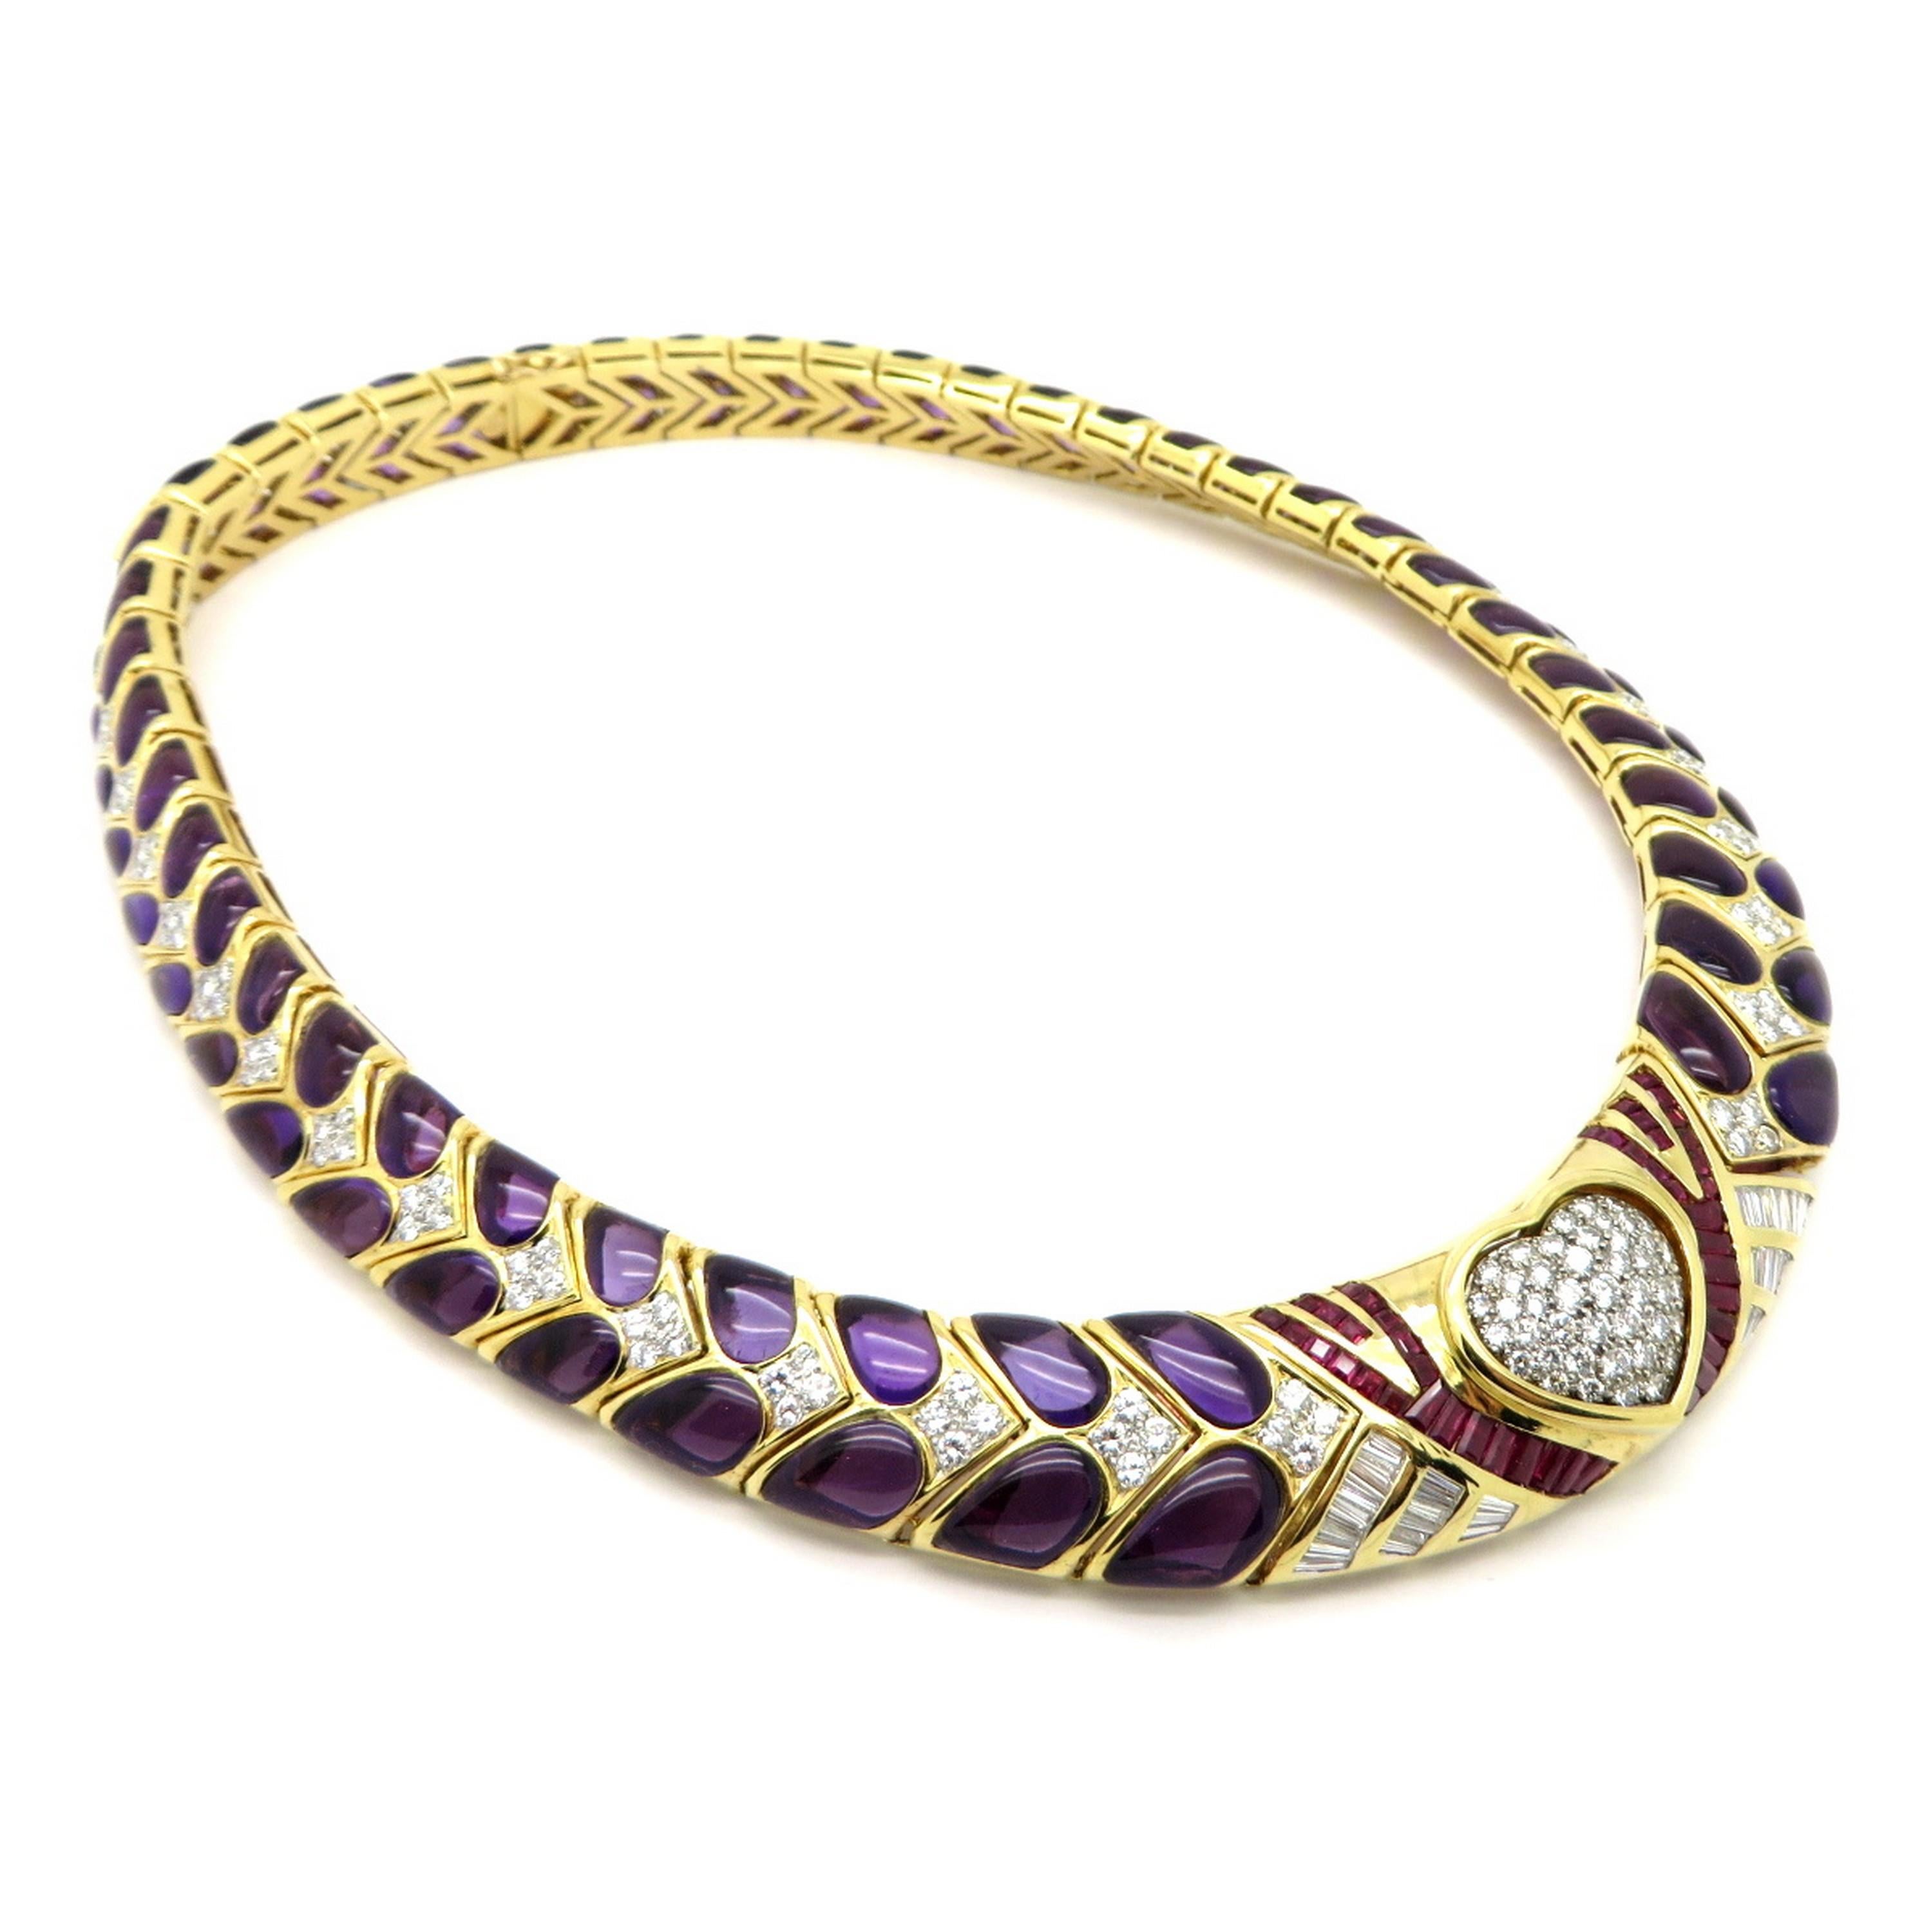 Estate 18K yellow gold 200 carat amethyst, ruby and diamond designer Endless Knot necklace. Showcasing 44 baguette and square cut fine quality rubies weighing a total of 3.00 carats. Featuring a diamond heart containing numerous pave set round